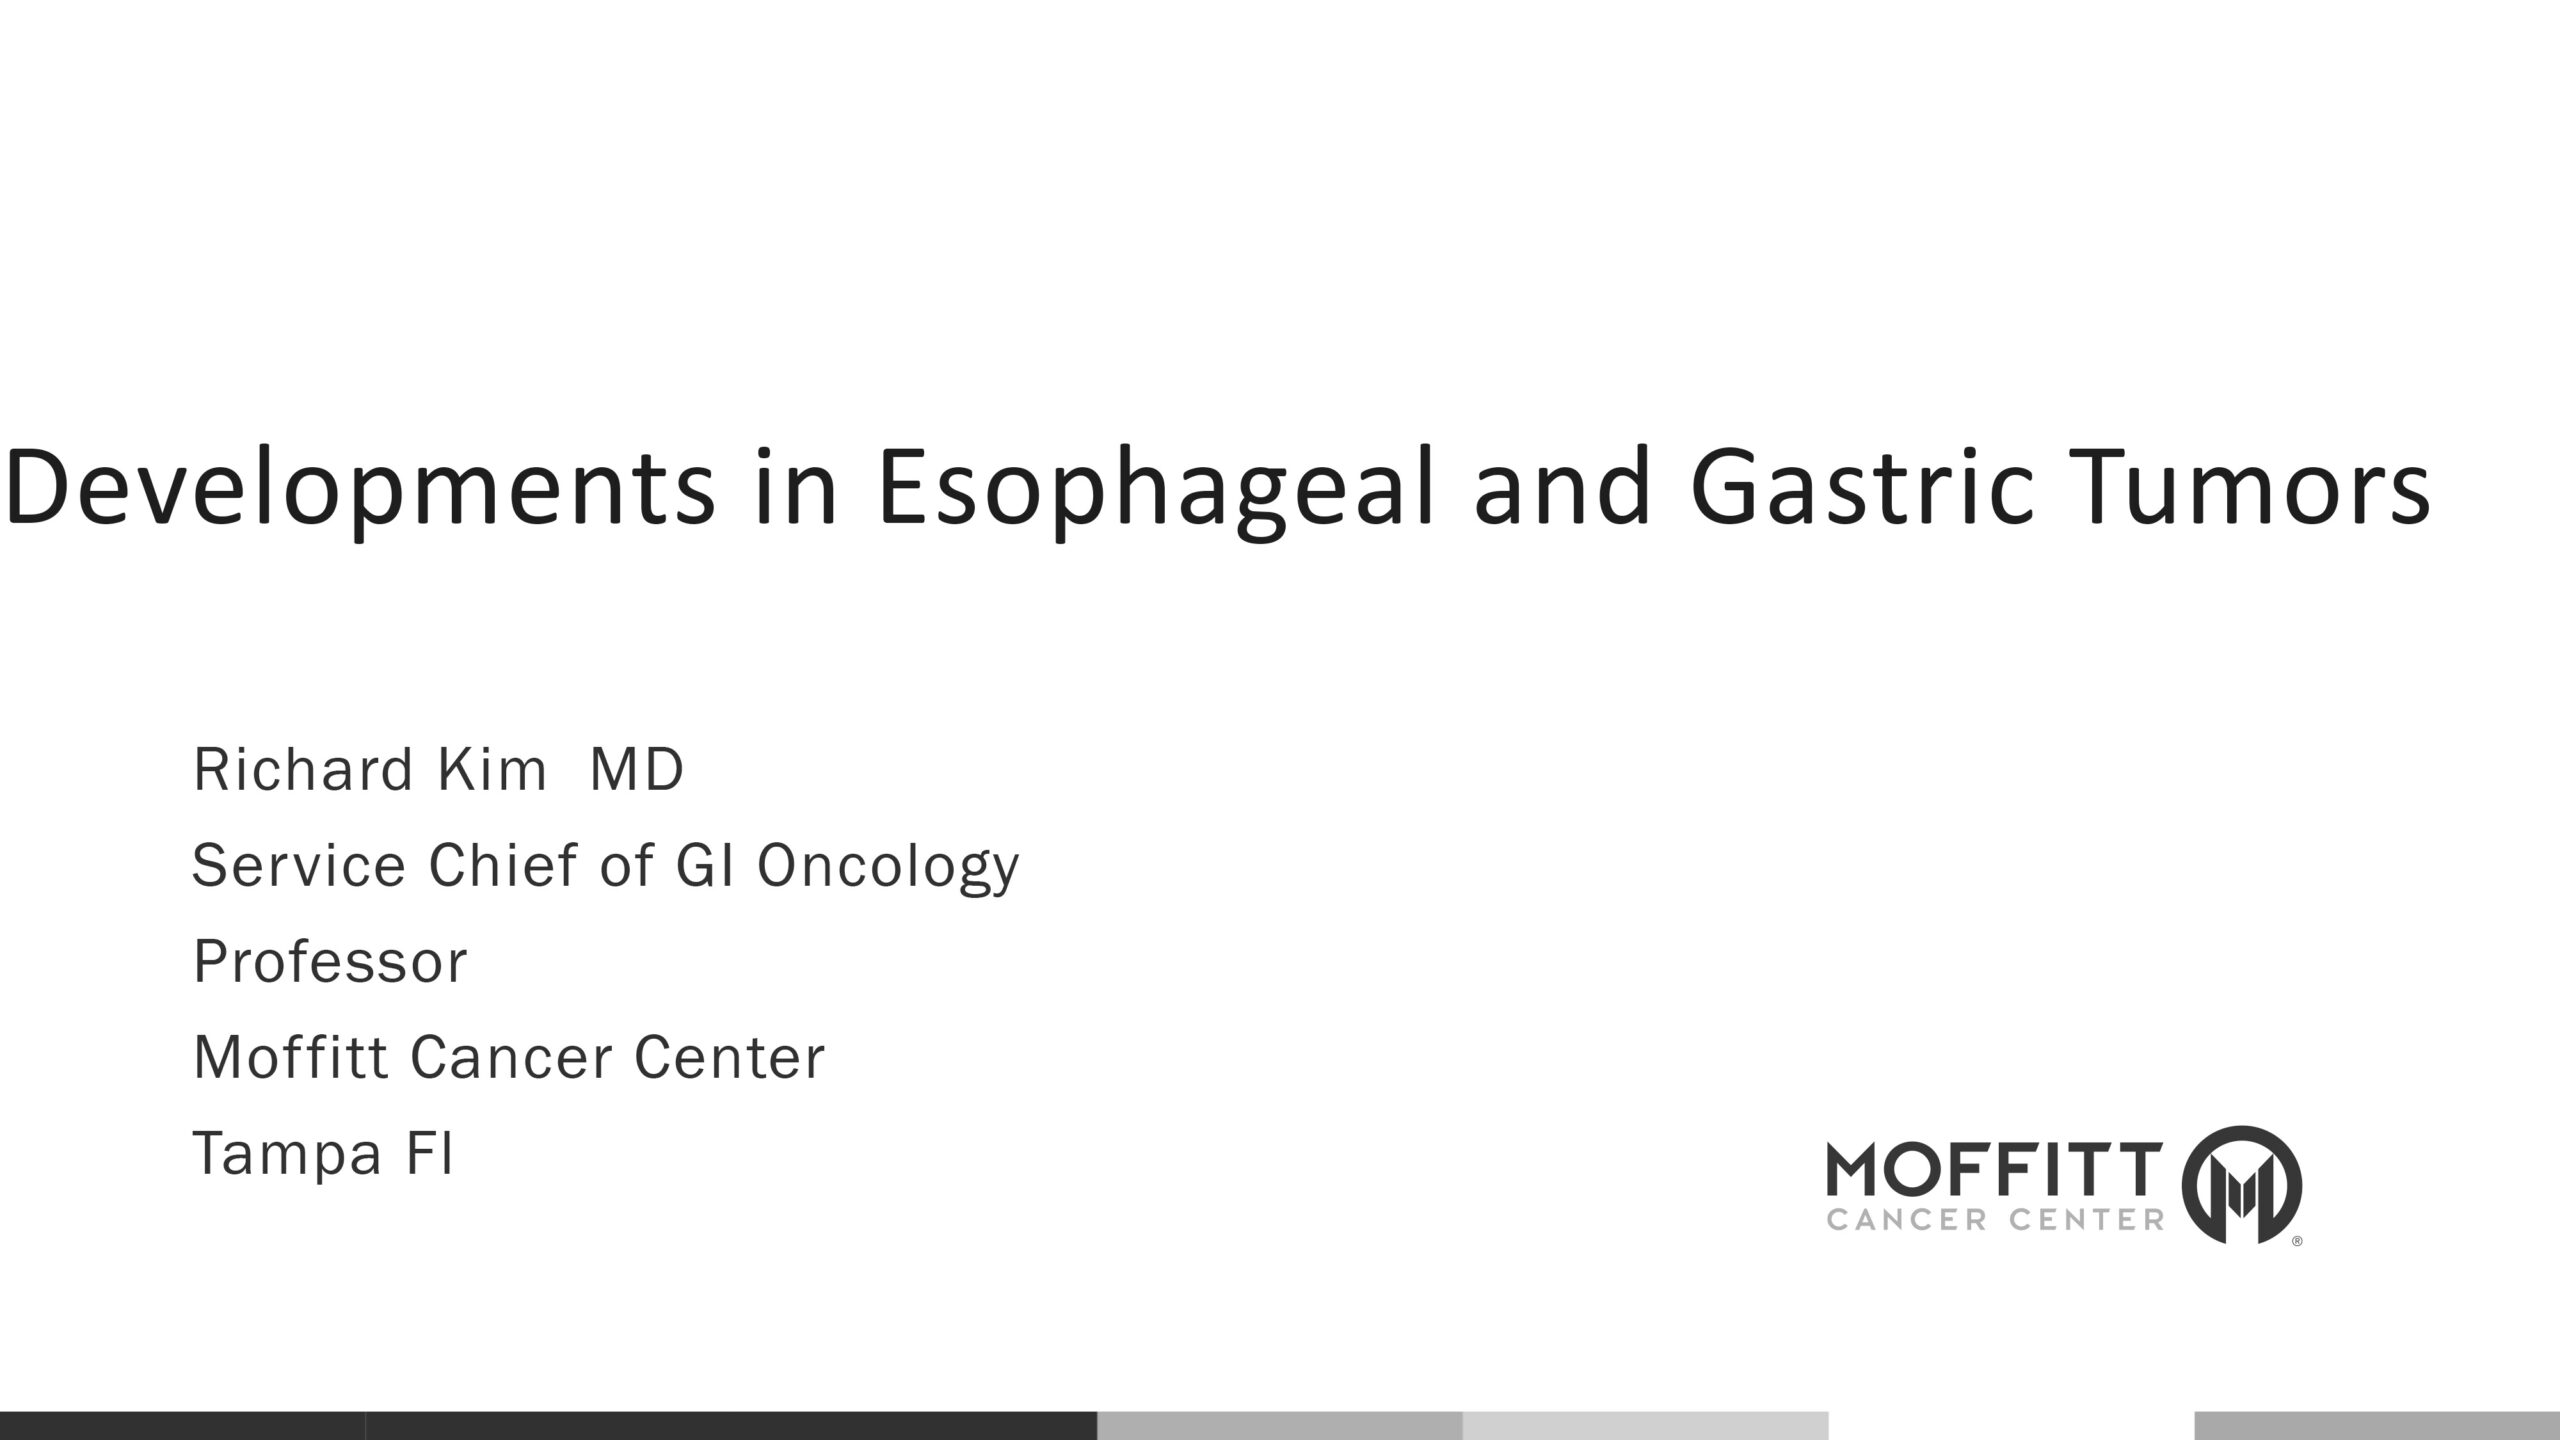 Developments in Esophageal and Gastric Tumors